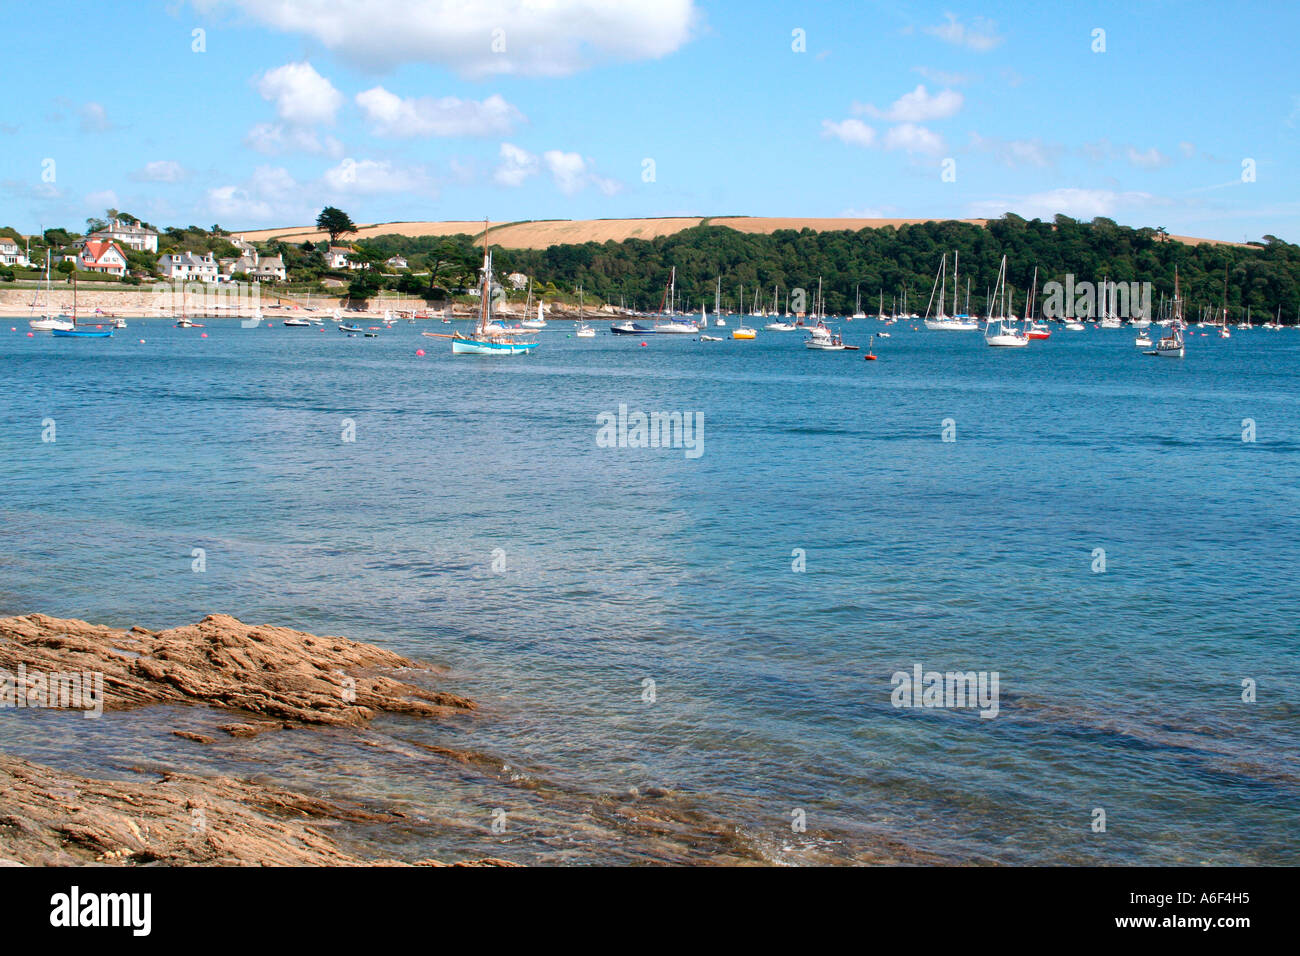 Sailing Boats on a sunny day in Roseland Cornwall, England Stock Photo